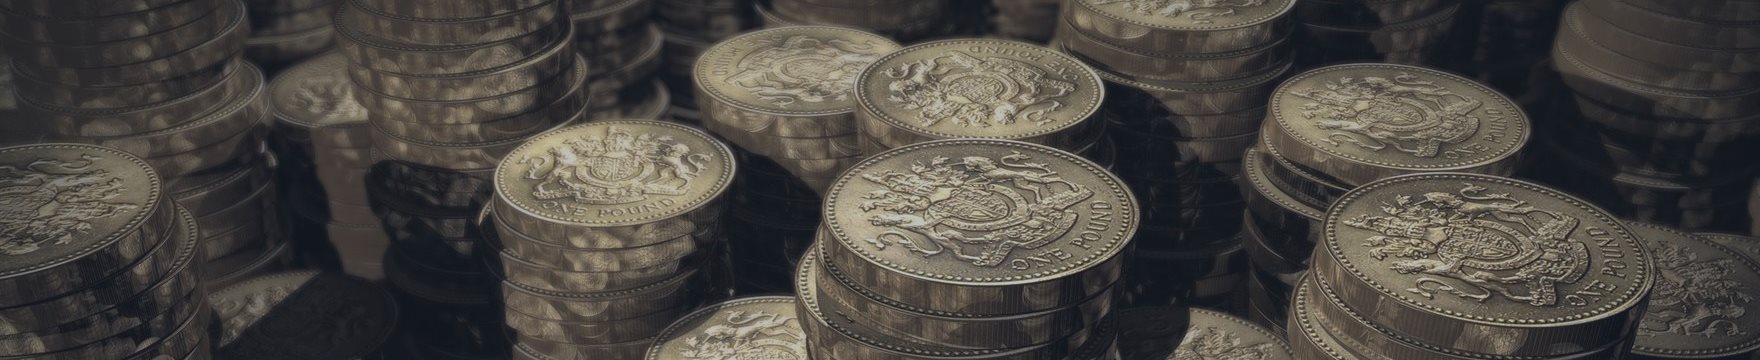 Pound higher vs dollar, but gains limited